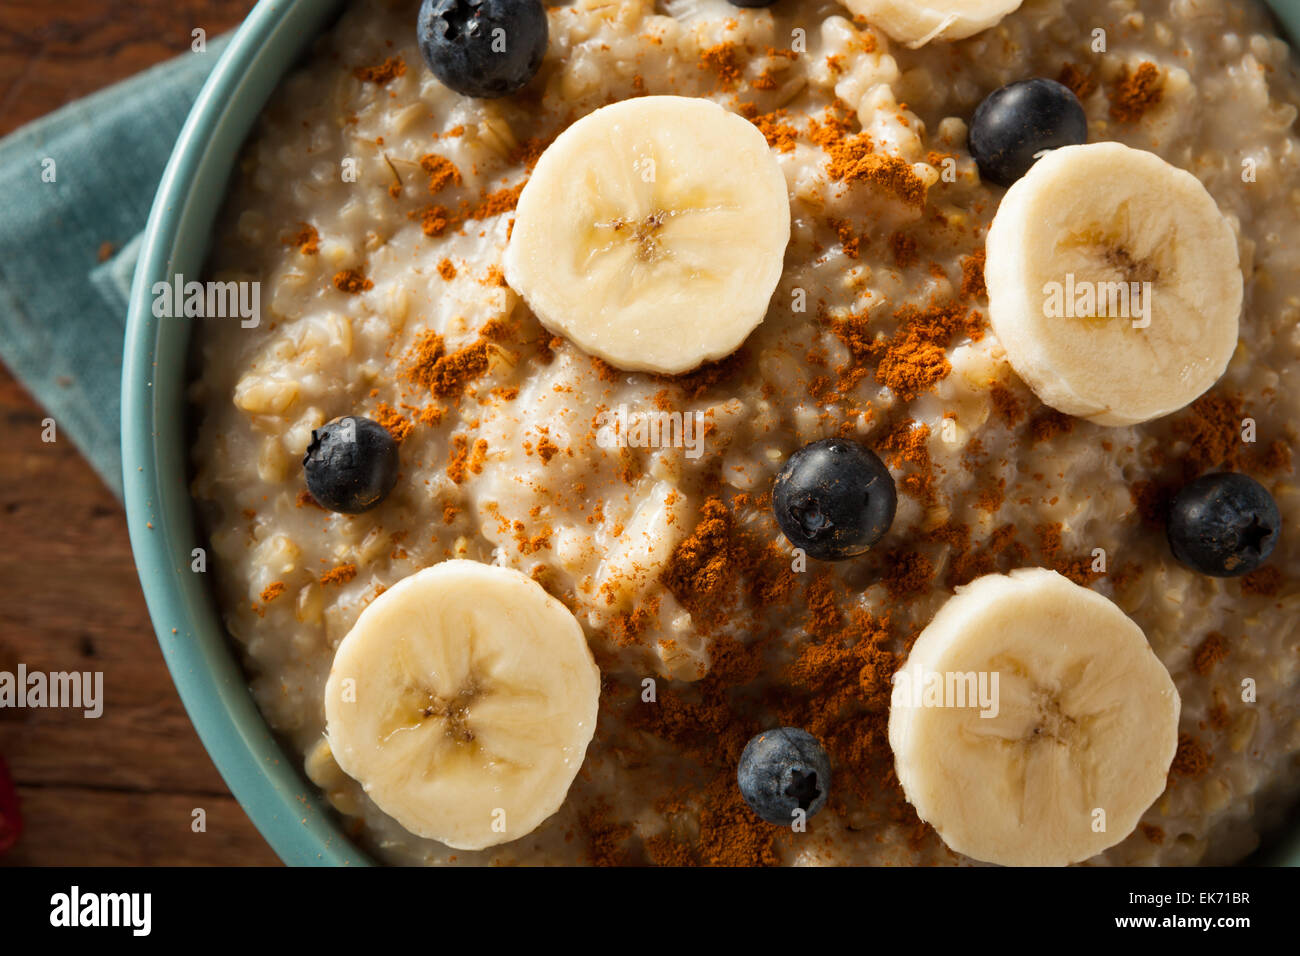 Homemade Healthy Steel Cut Oatmeal with Fruit and Cinnamon Stock Photo